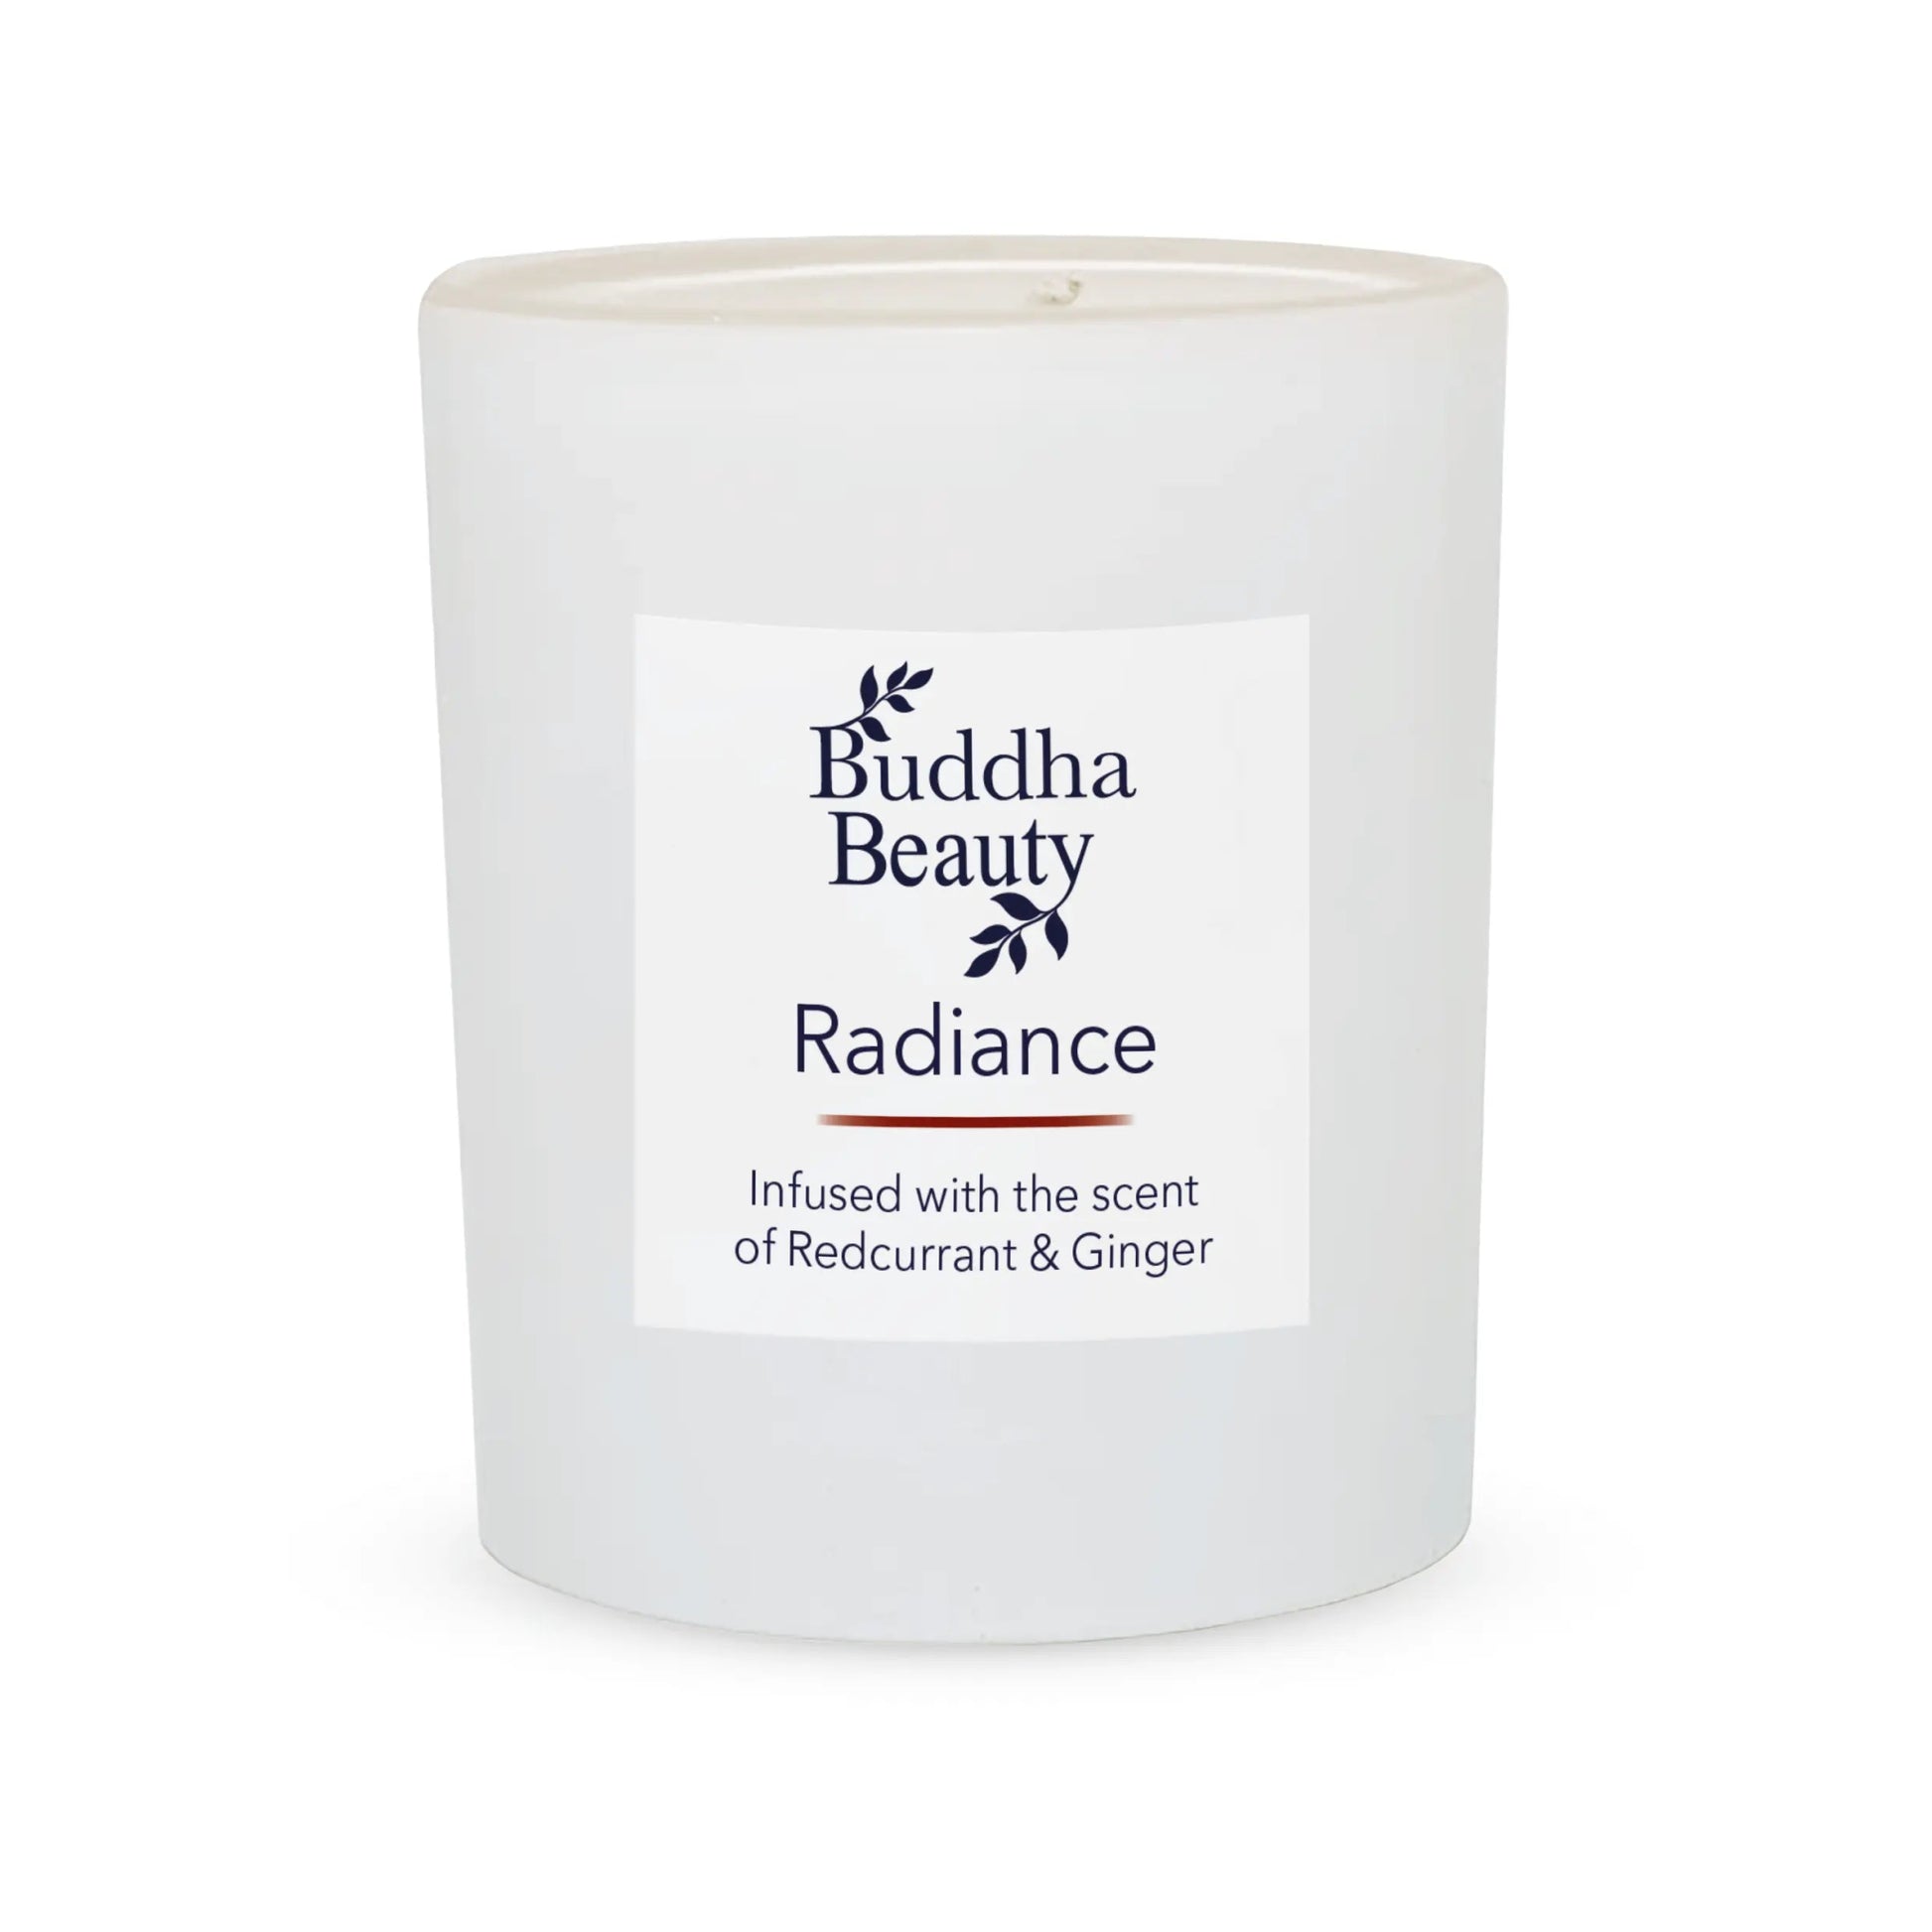 Radiance Redcurrant & Ginger Room Candle - Buddha Beauty Skincare Room Candle #vegan# #cruelty-free# #skincare#